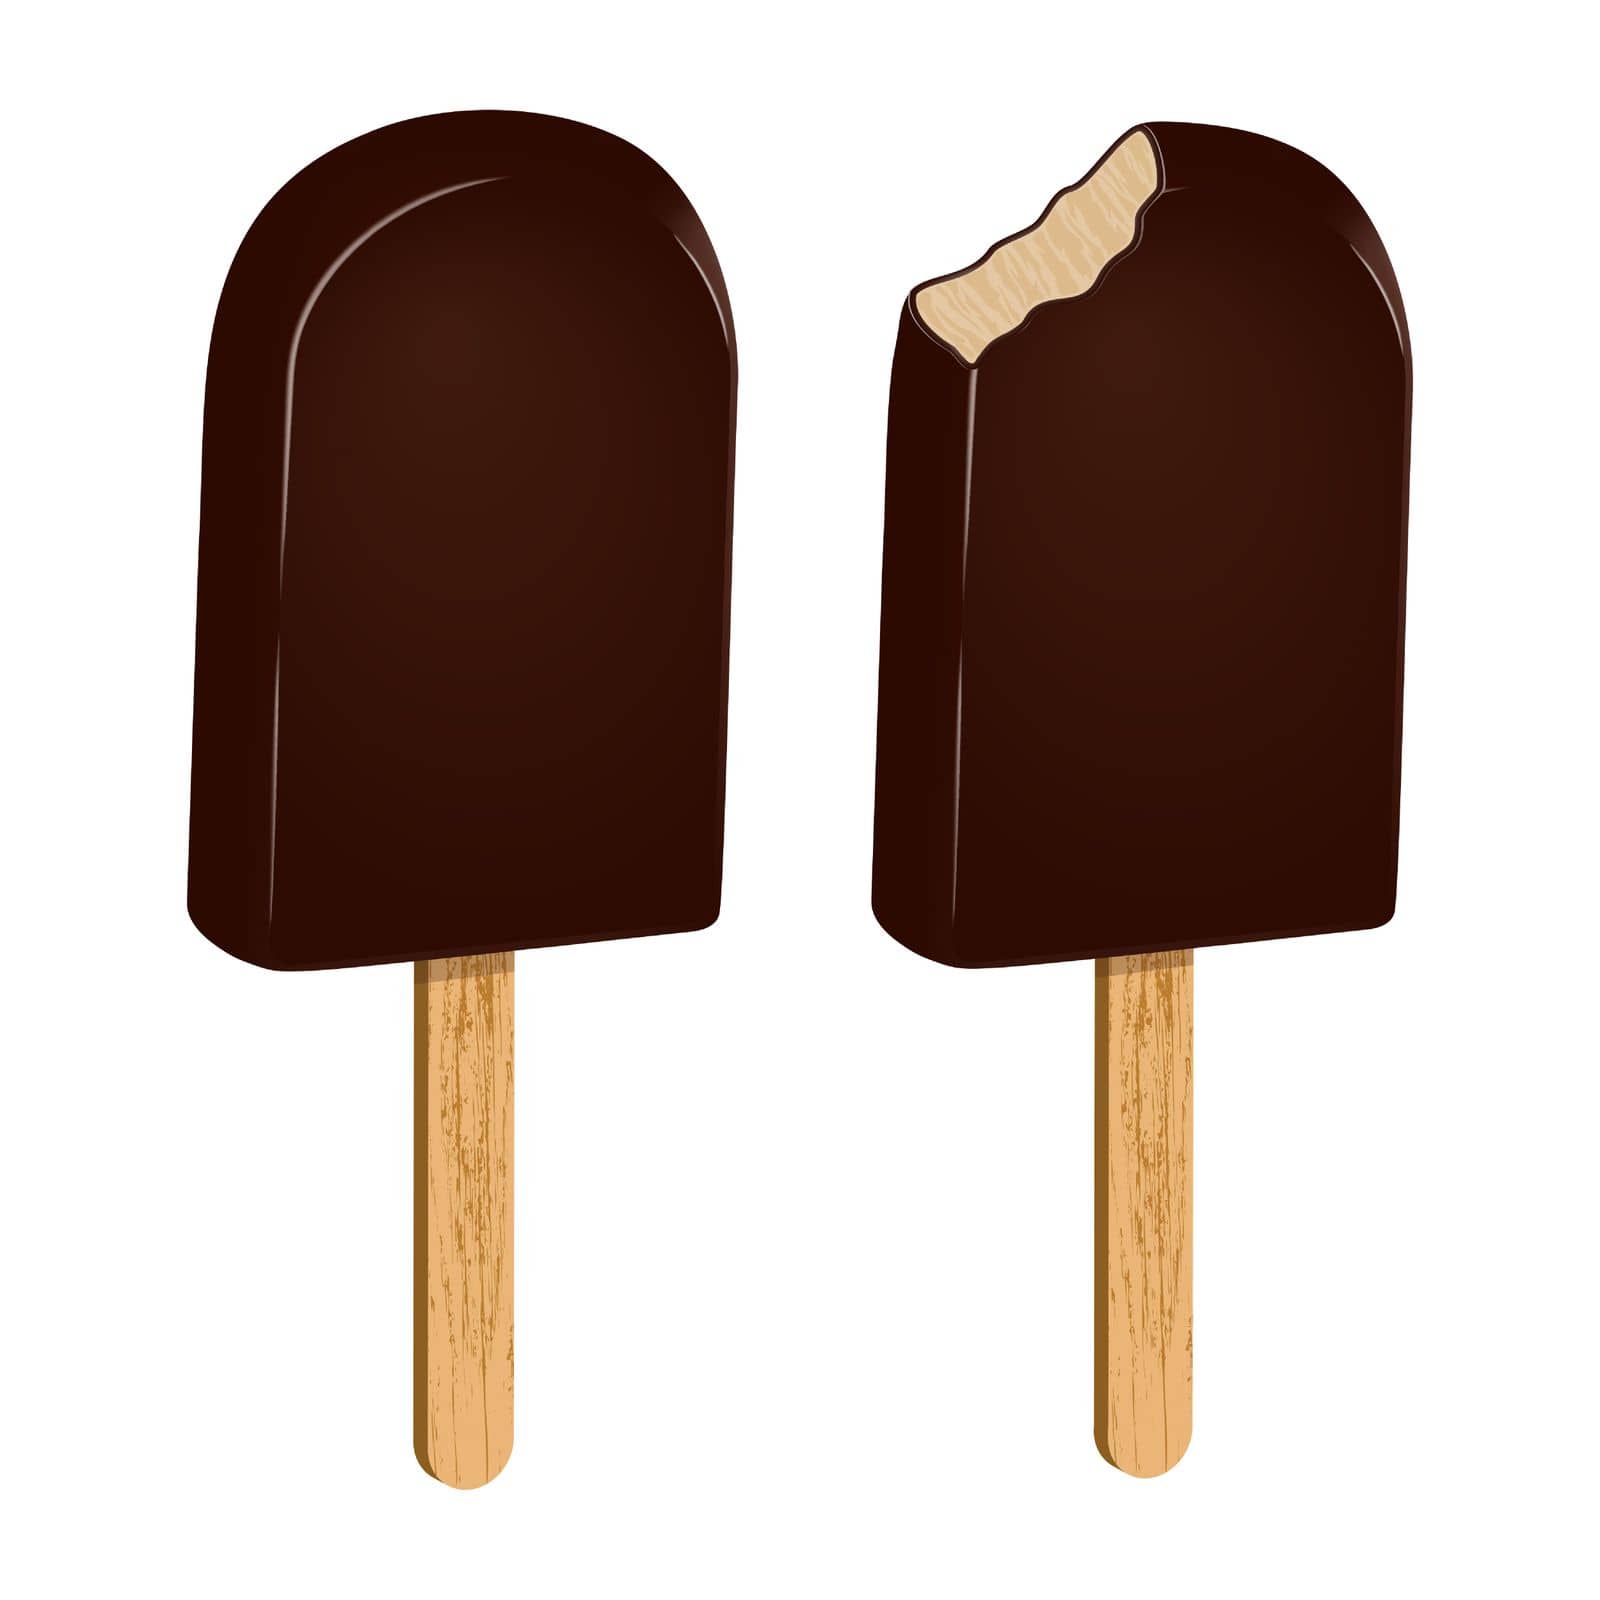 Set of ice cream in chocolate icing on a stick, whole and bitten. Popsicle chocolate ice cream. Frozen product sweet food. Realistic 3D food poster. Vector illustration.